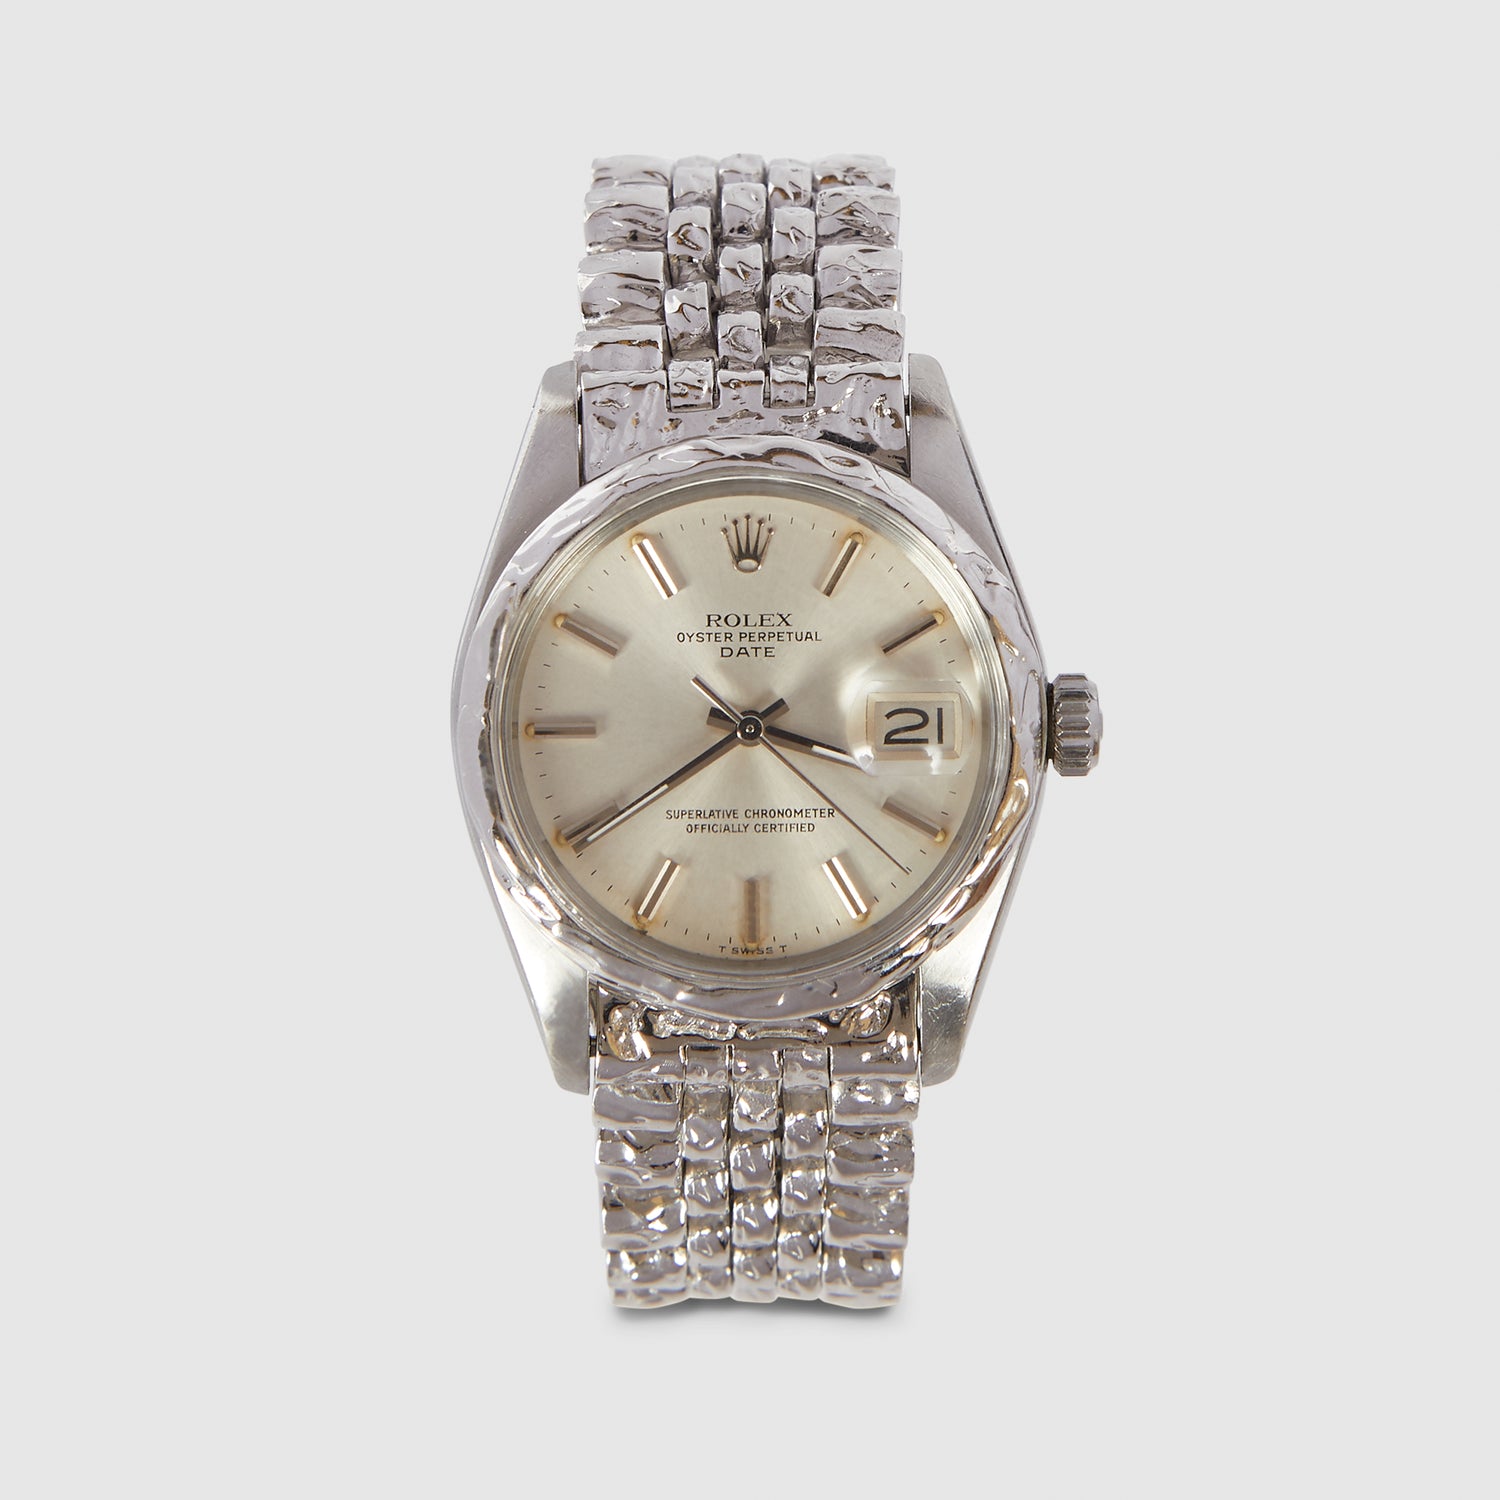 Customised Vintage Rolex Oyster Perpetual Date Watch